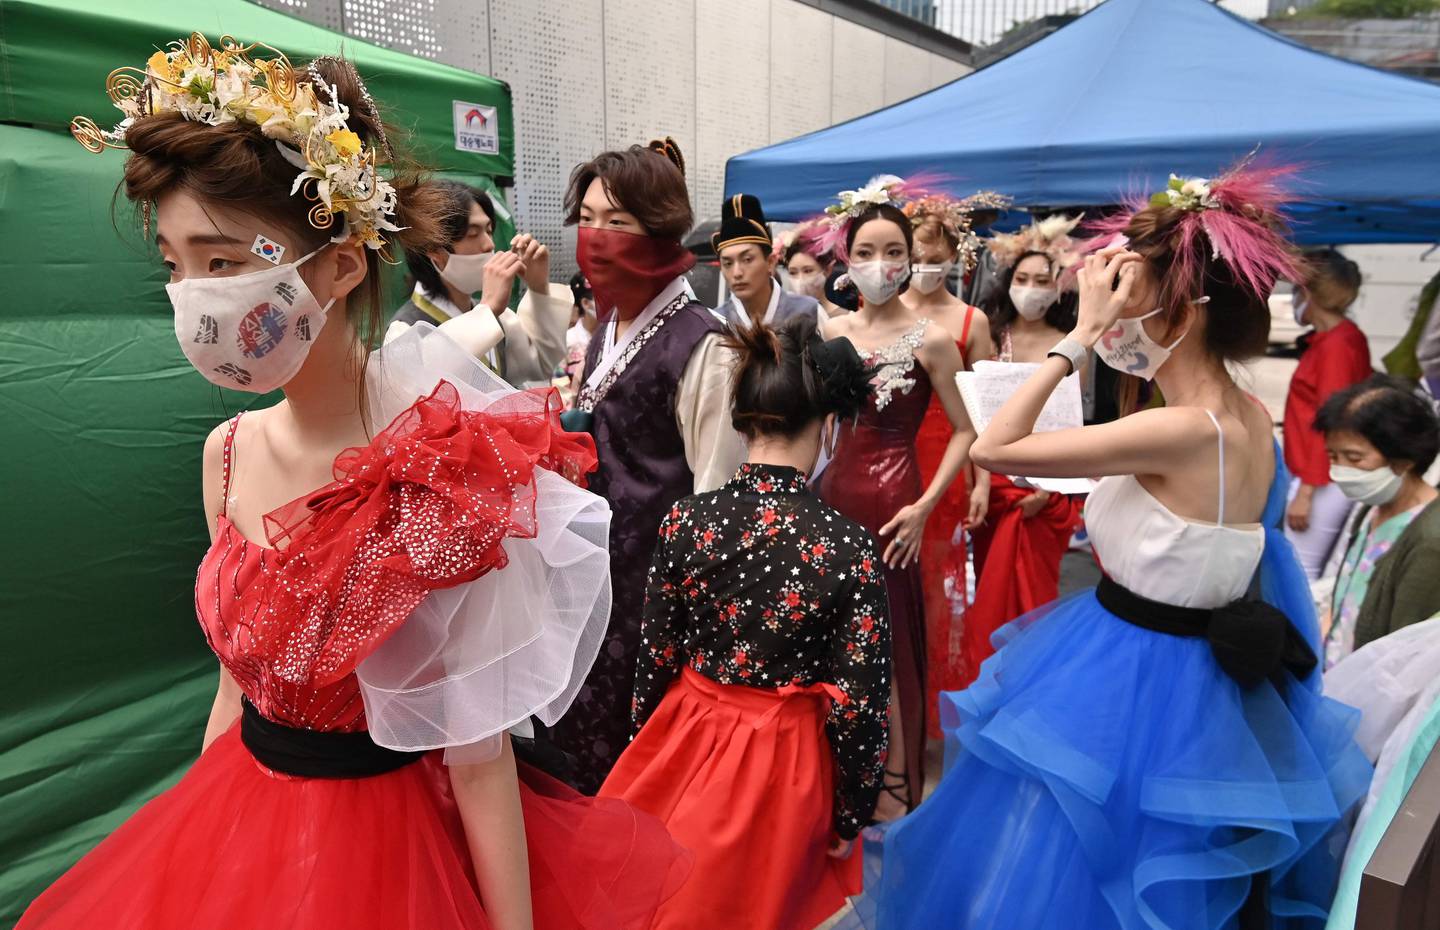 Models wearing face masks prepare backstage prior to a mask fashion show at Gangnam district in Seoul on August 14, 2020 amid the ongoing COVID-19 coronavirus pandemic. (Photo by Jung Yeon-je / AFP)